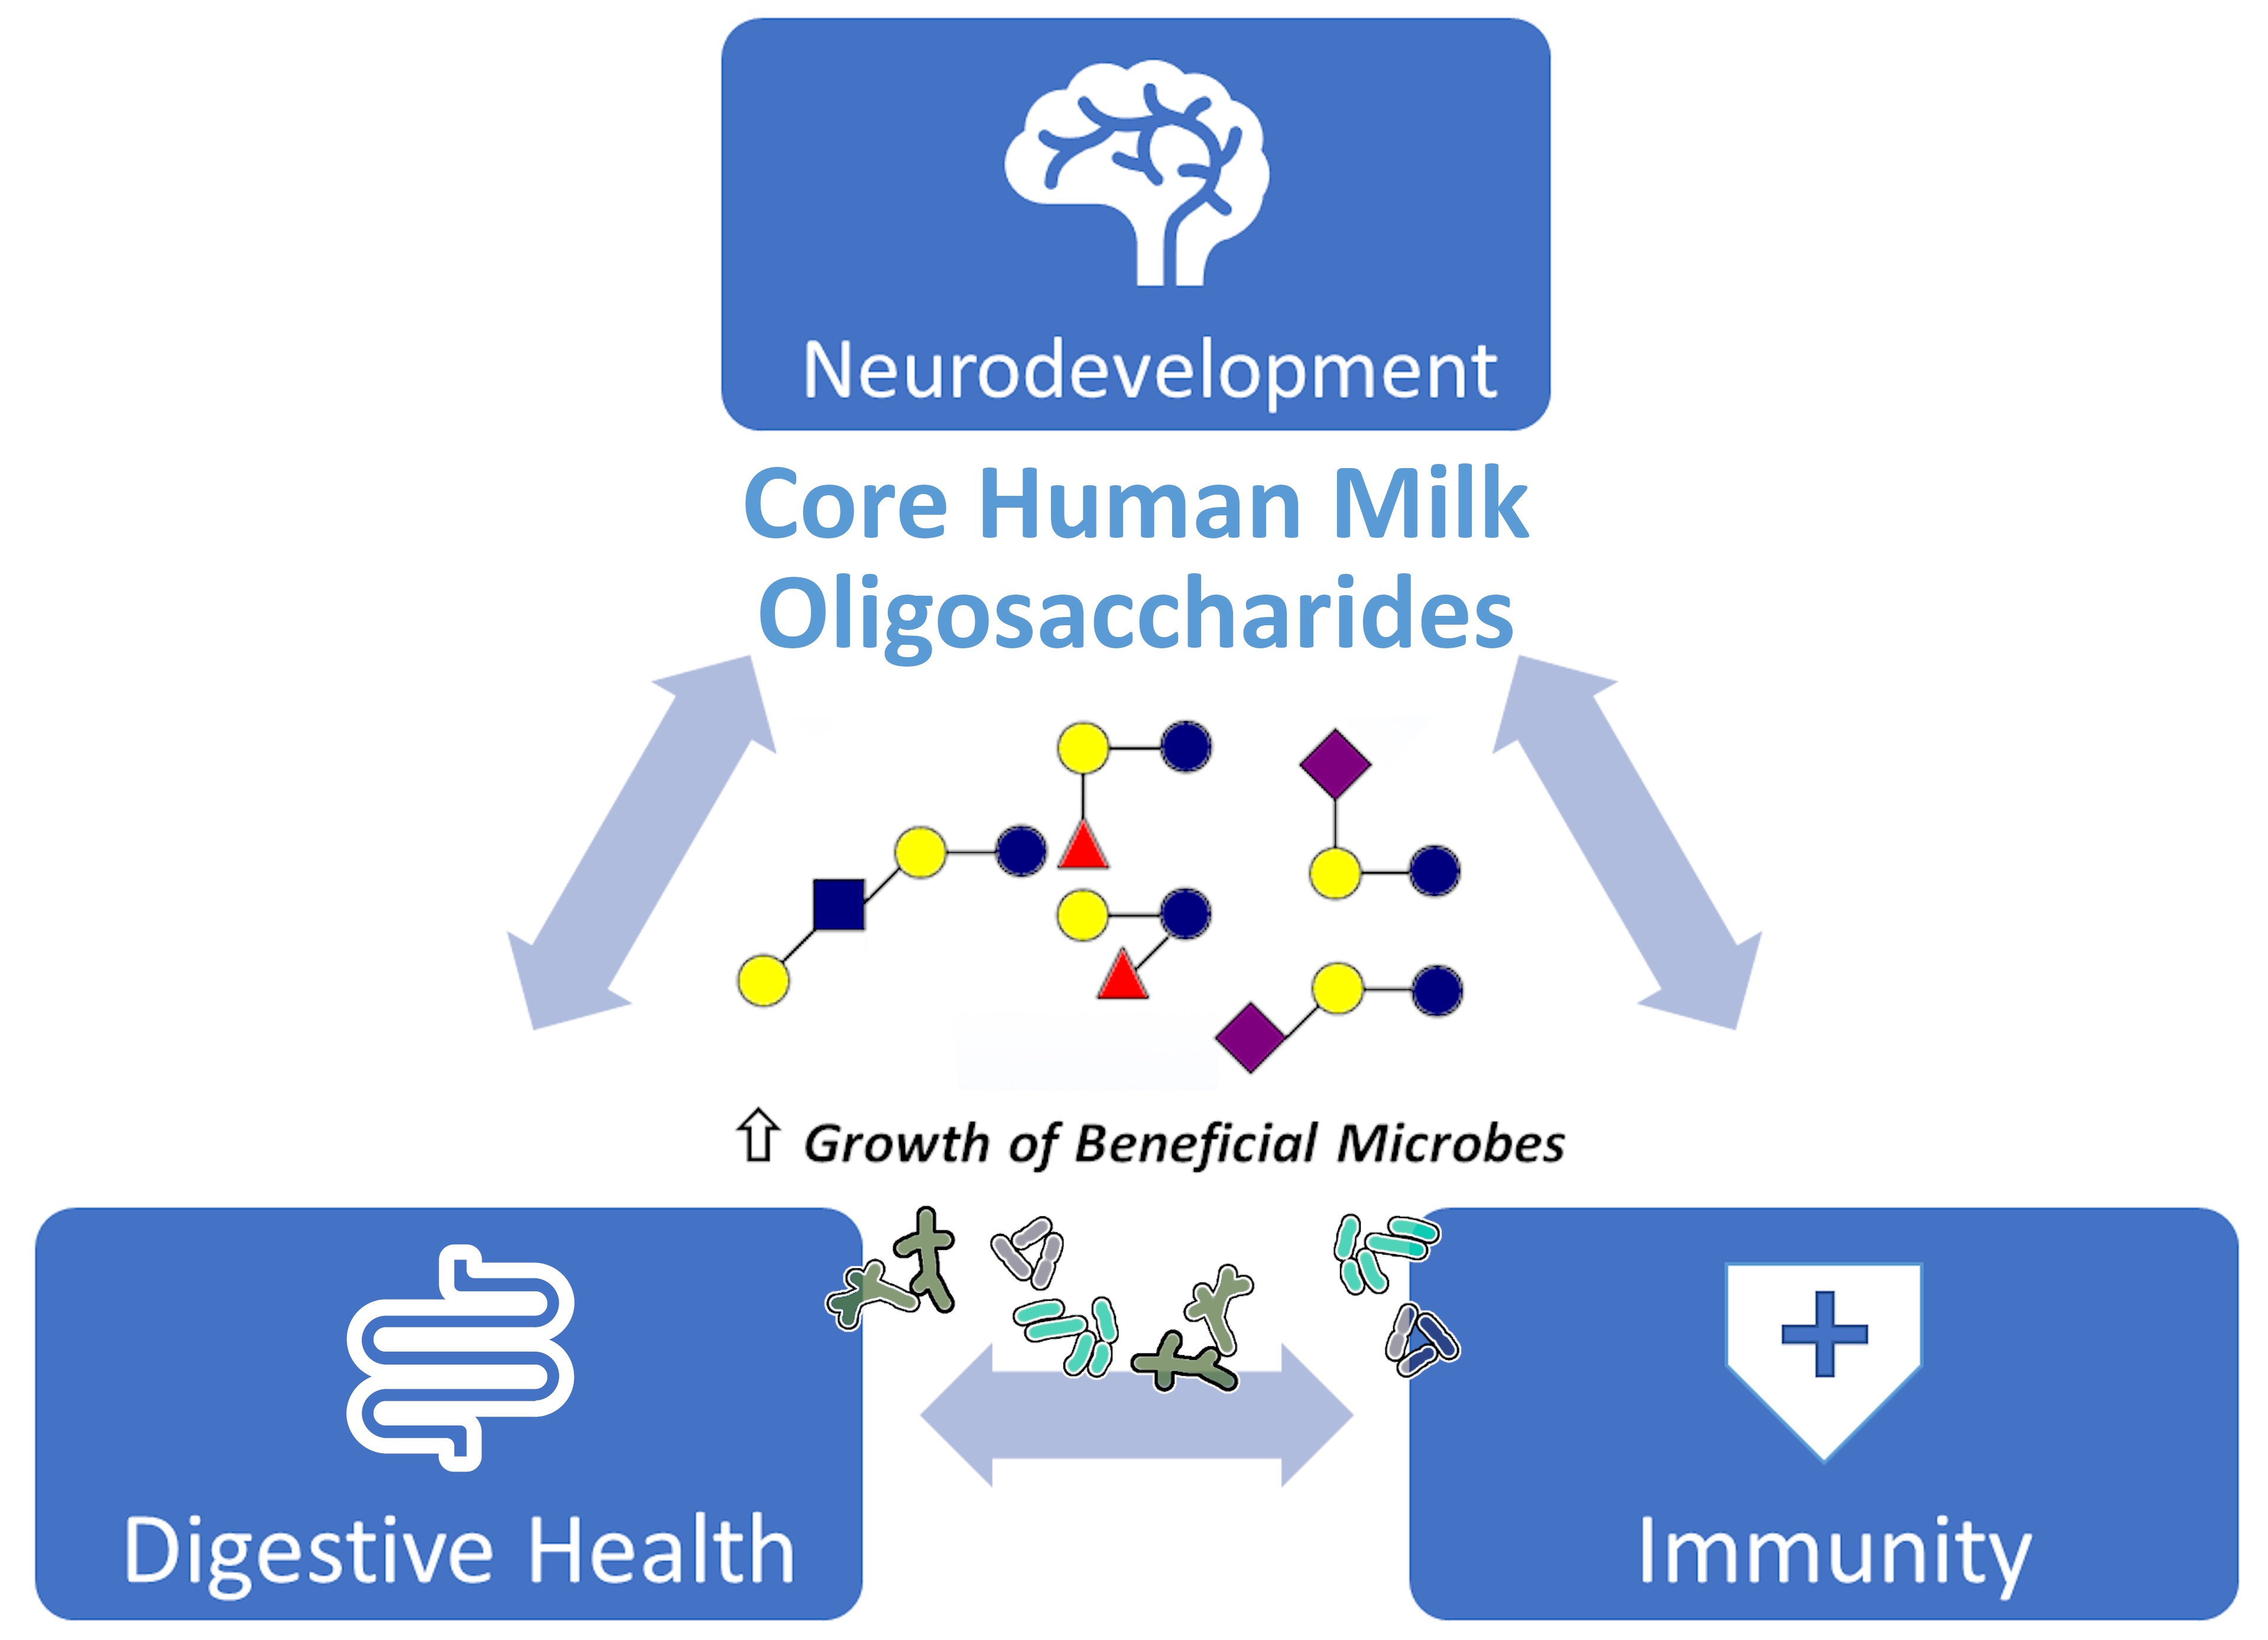 Synthesis as an Expanding Resource in Human Milk Science